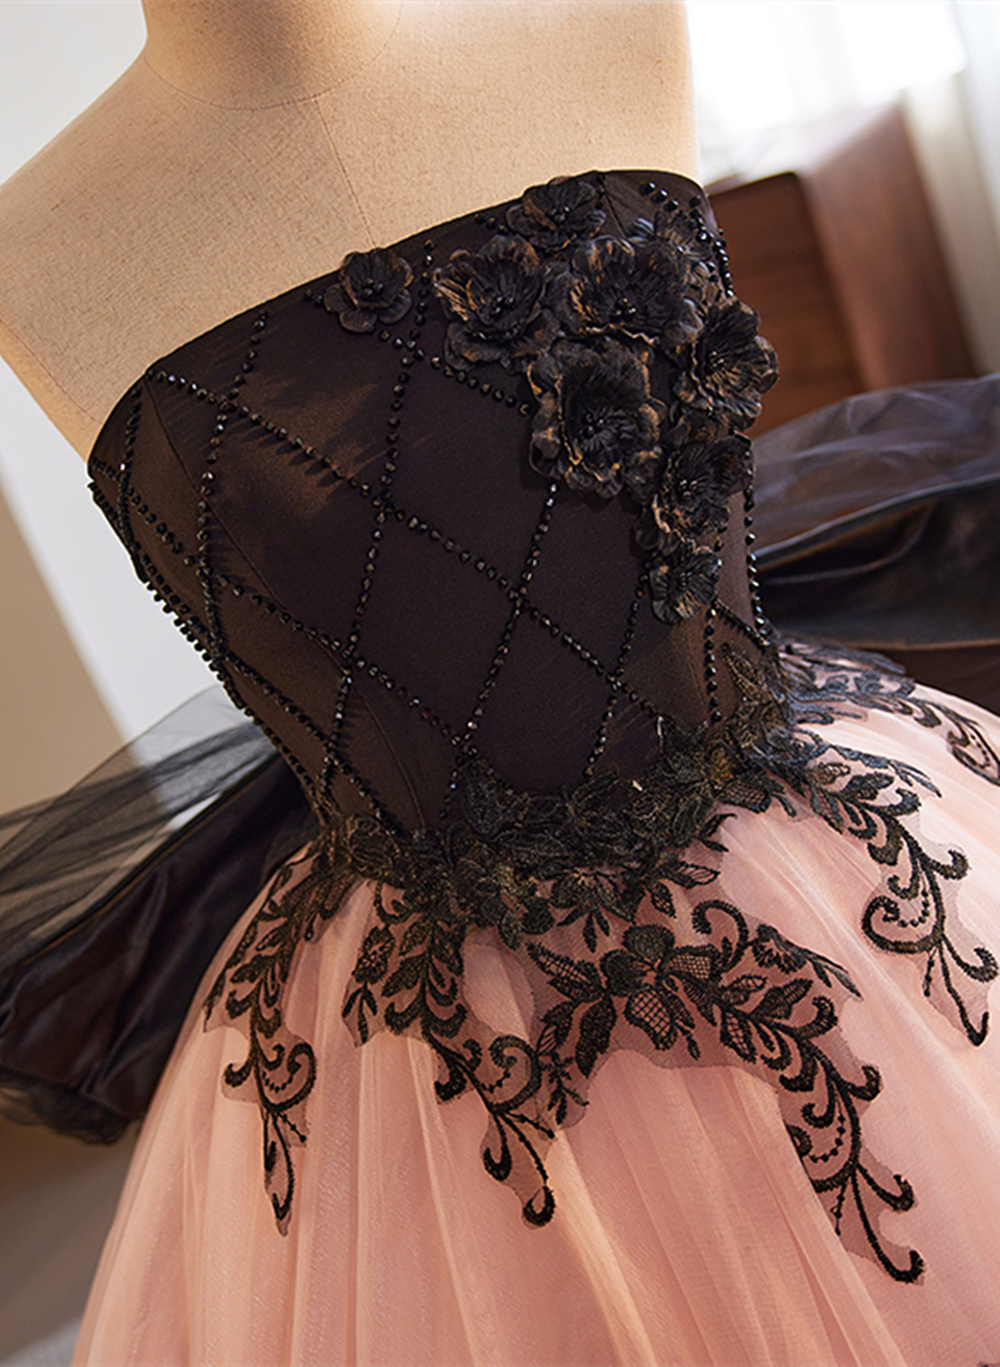 Pink and Black Lace Tulle Ball Gown Sweet 16 Dress, Pink and Black Long Formal Dress